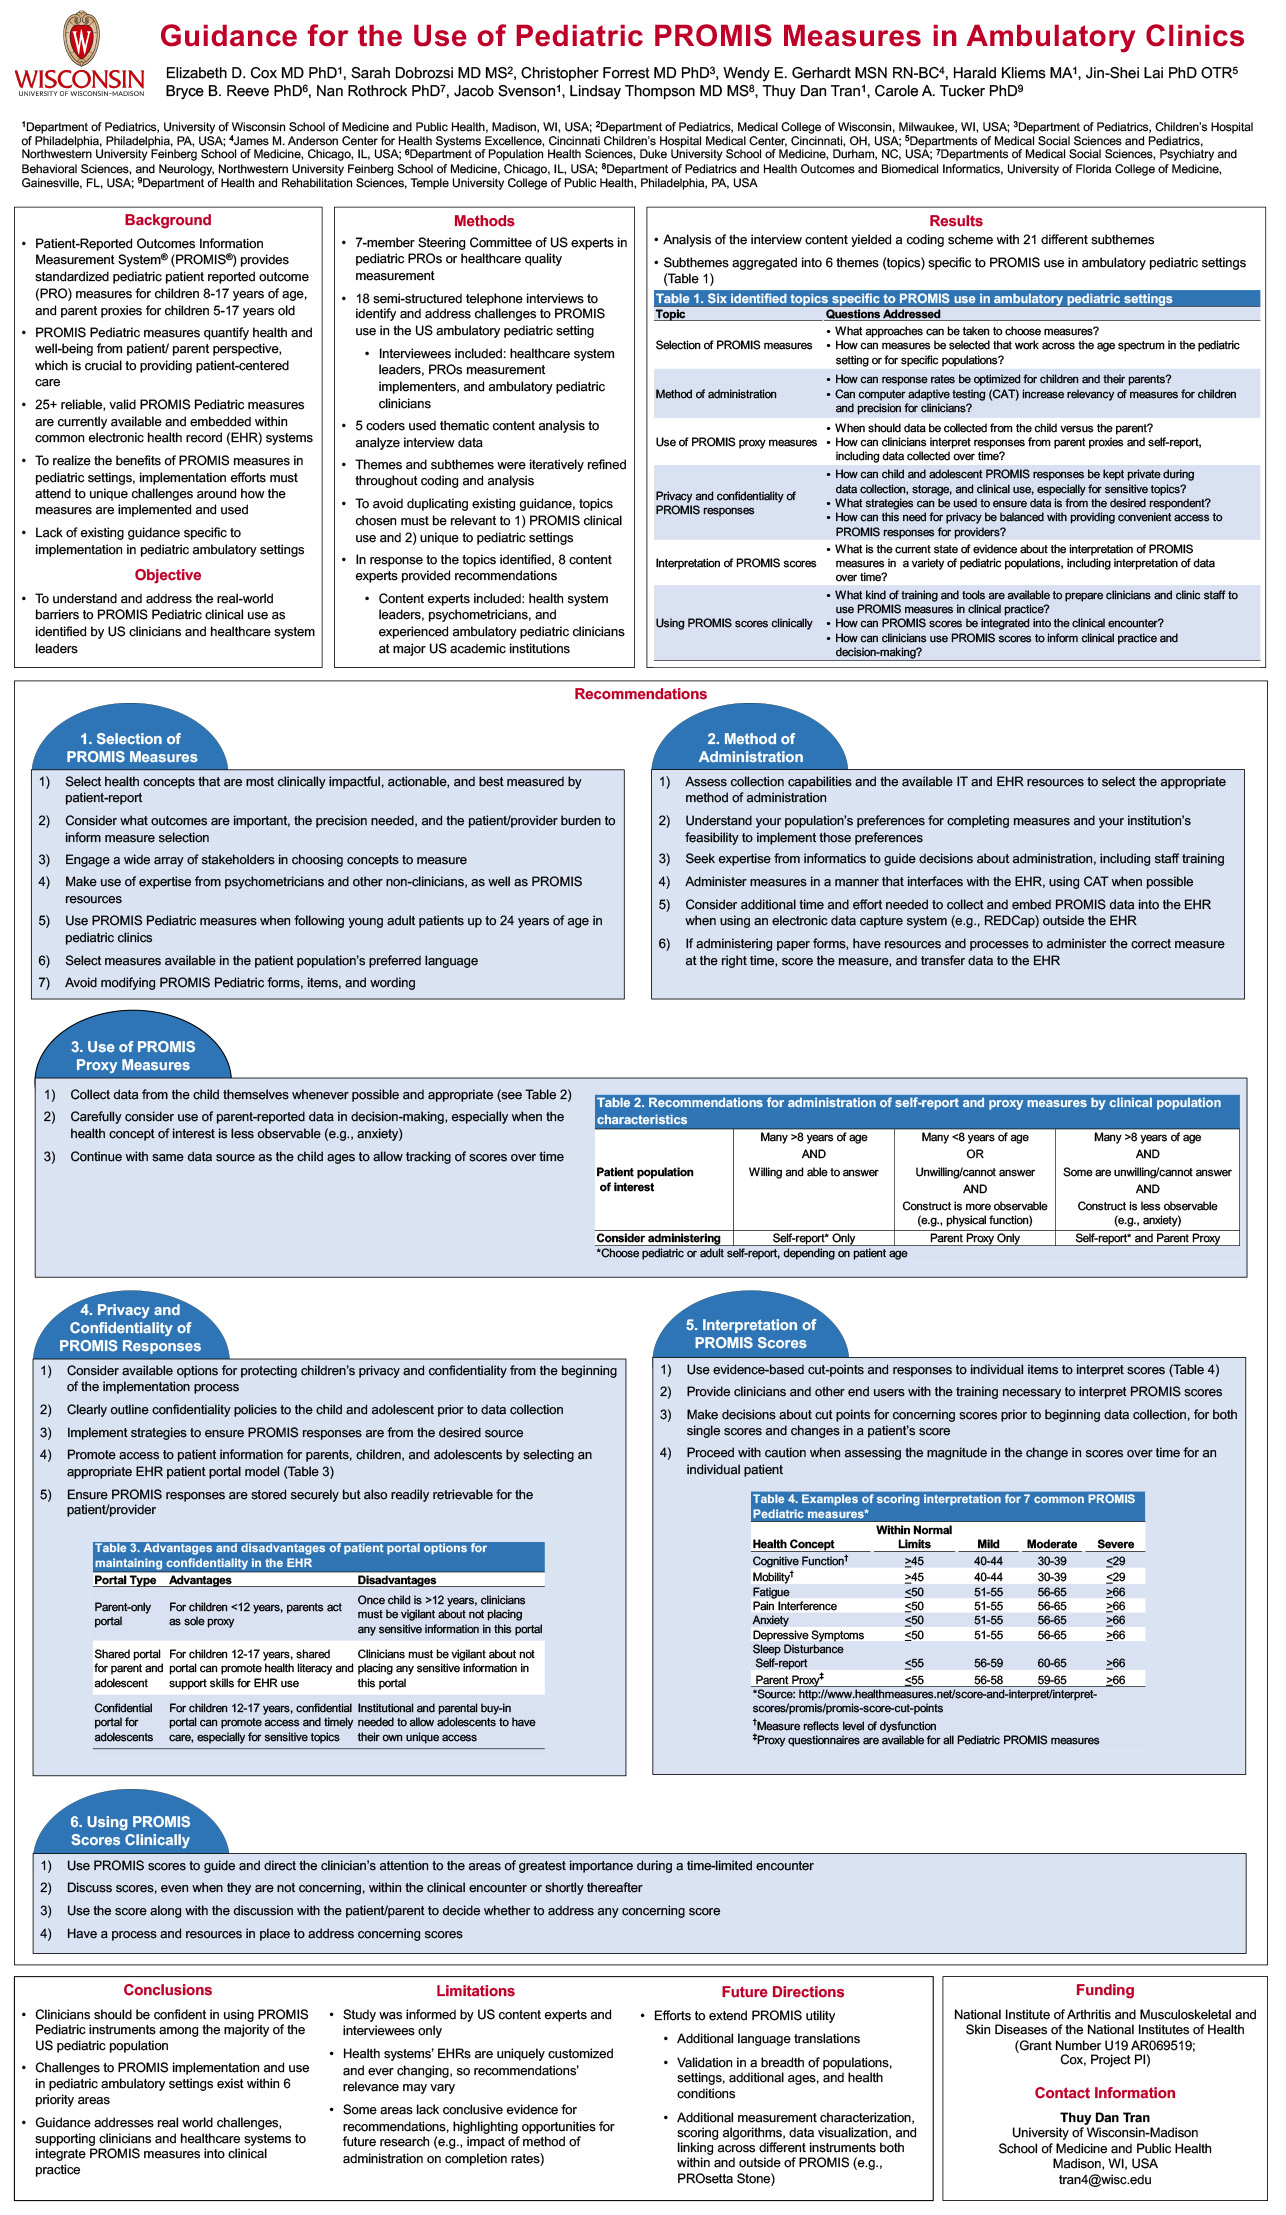 Guidance for the Use of Pediatric PROMIS Measures in Ambulatory Clinics poster image